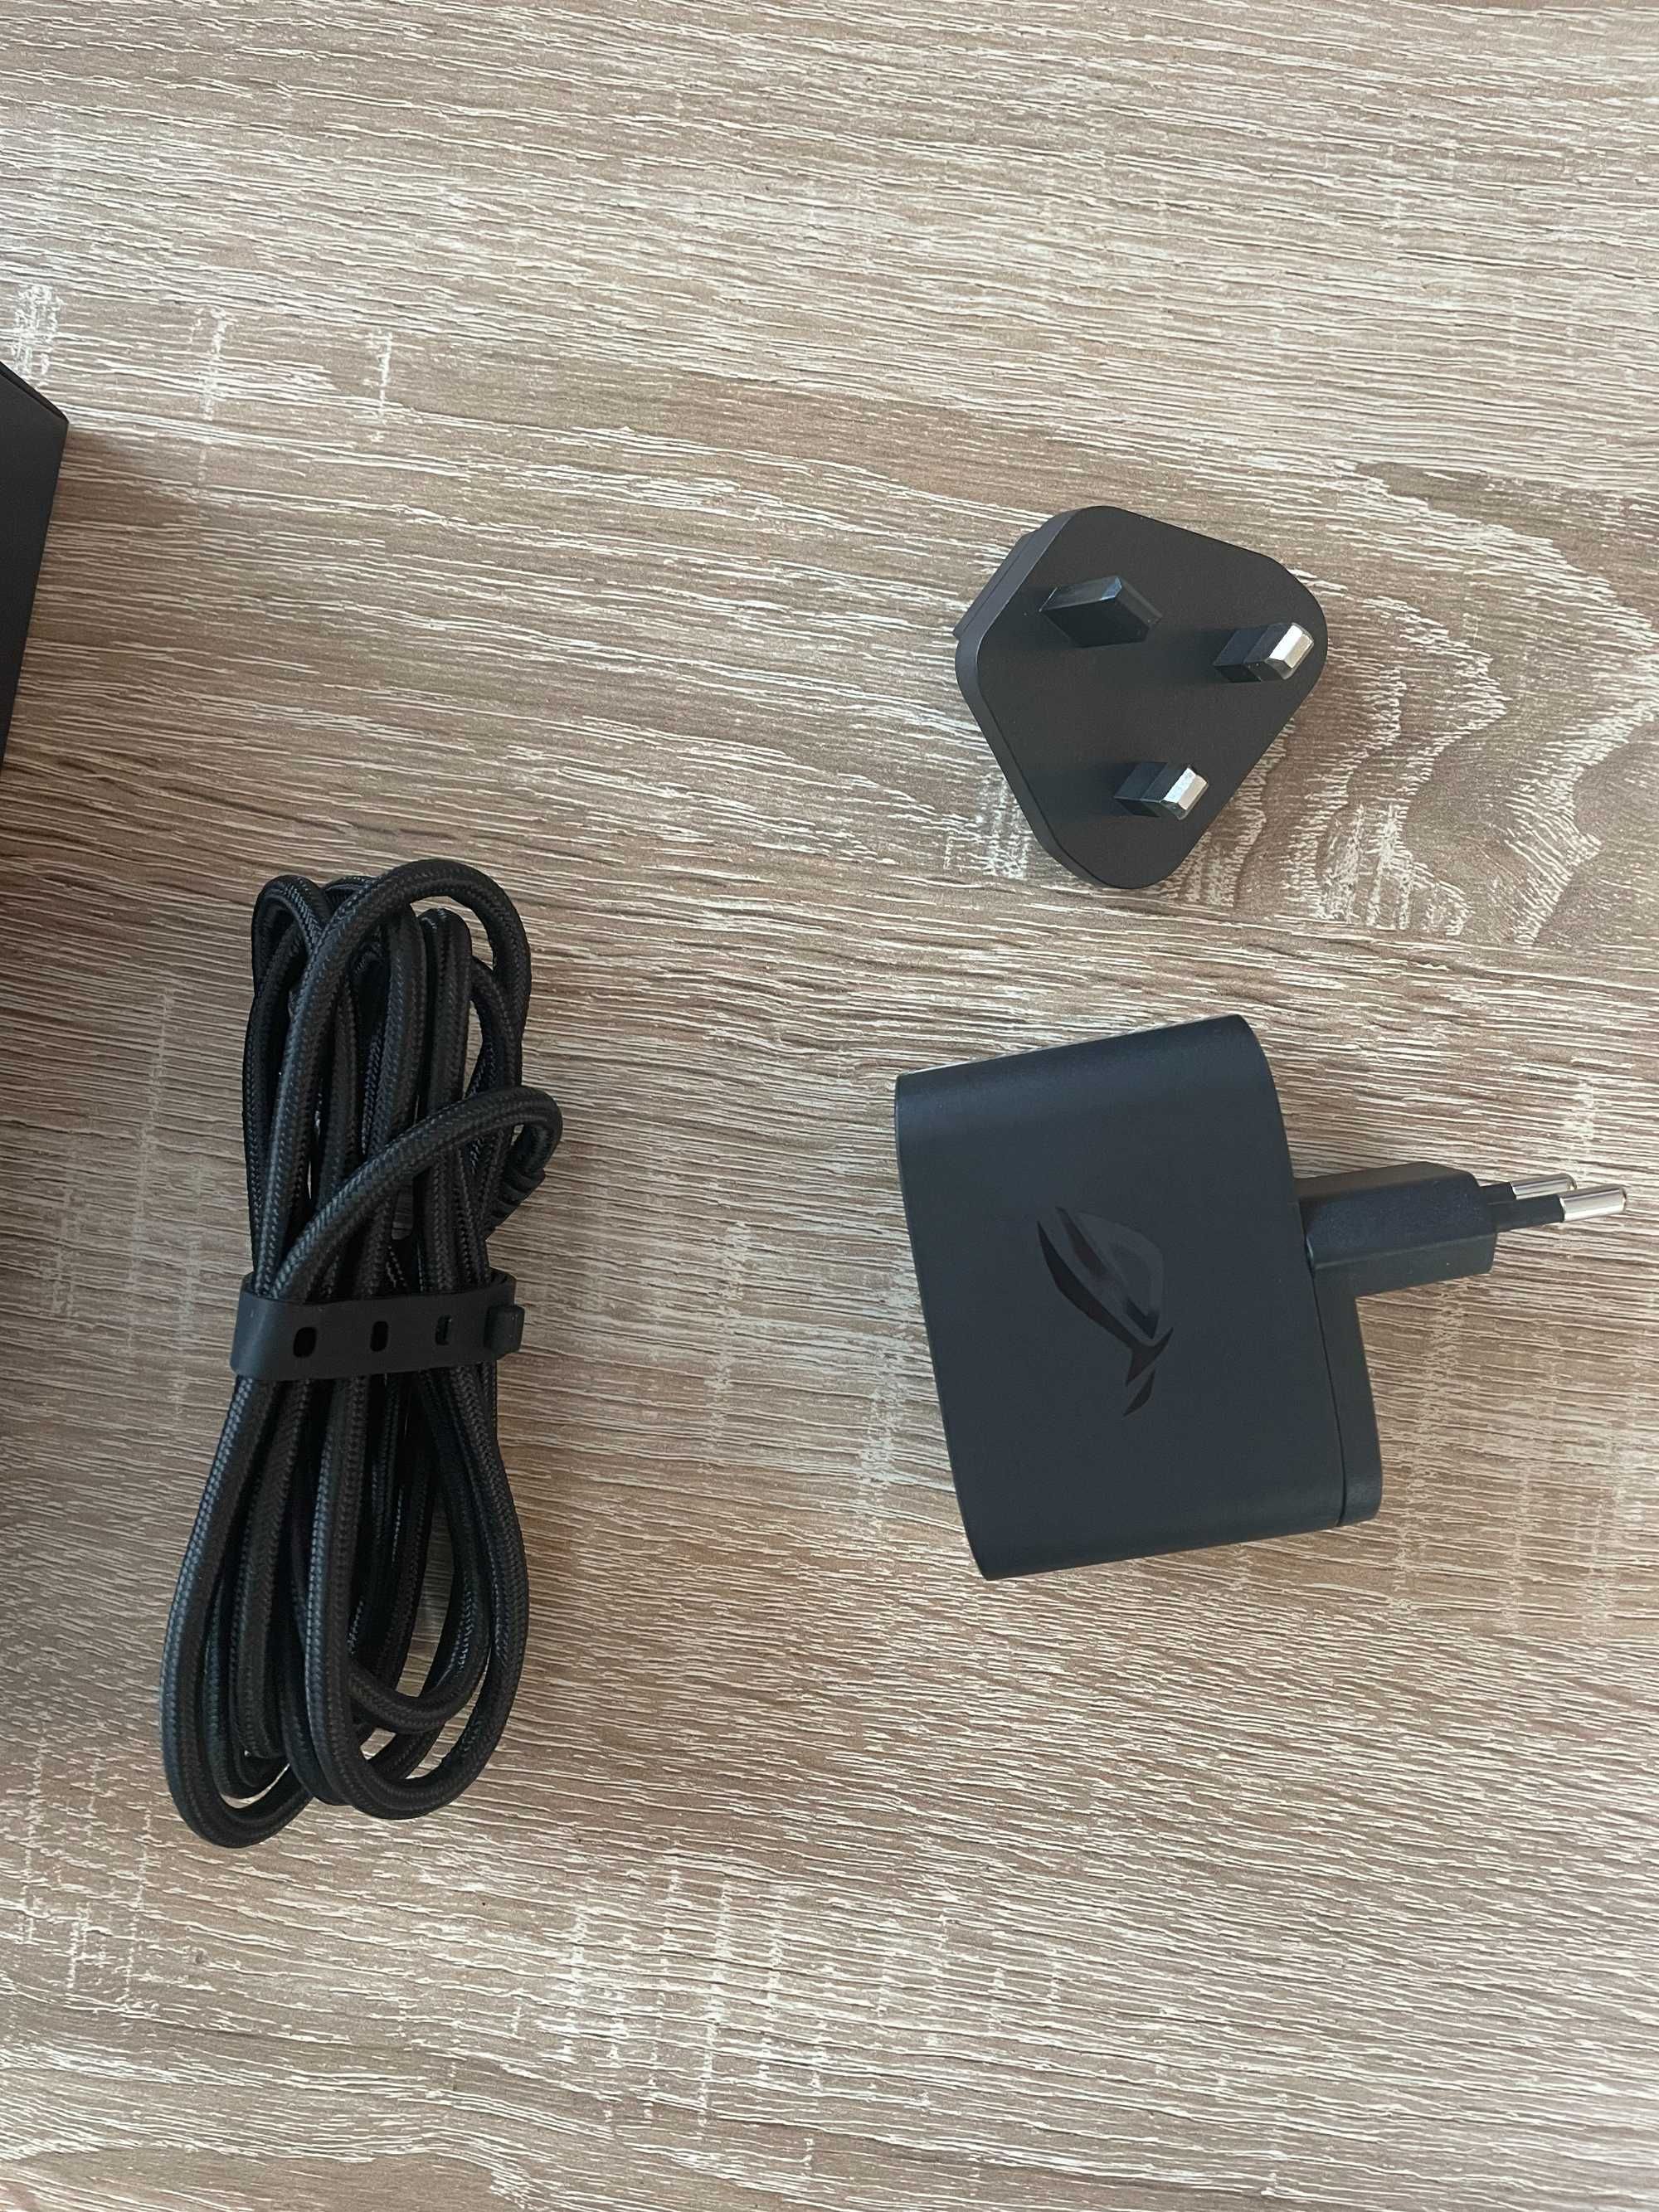 Asus docking charger